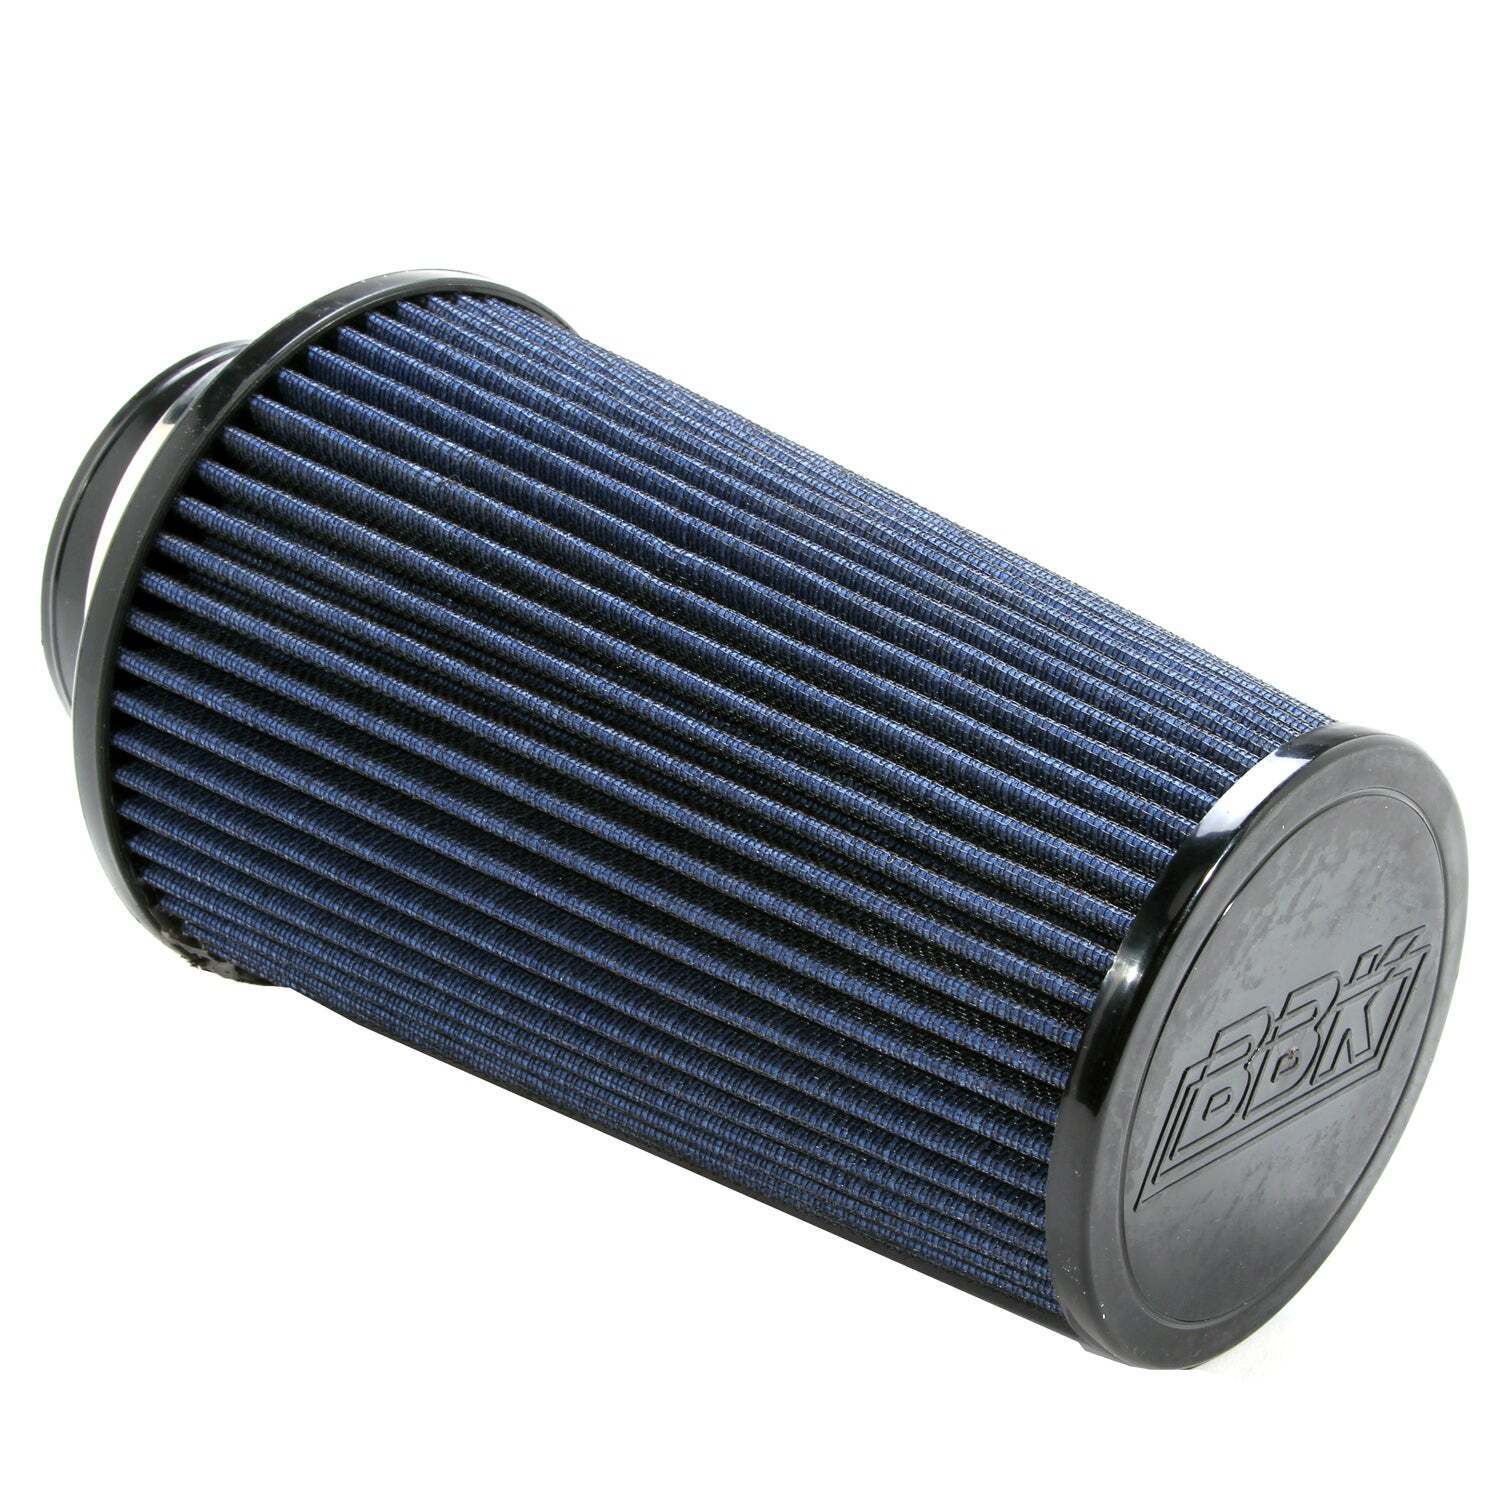 BBK BLUE REPLACEMENT COLD AIR FILTER (FITS KITS 1556 1720 1734 1736 1737)